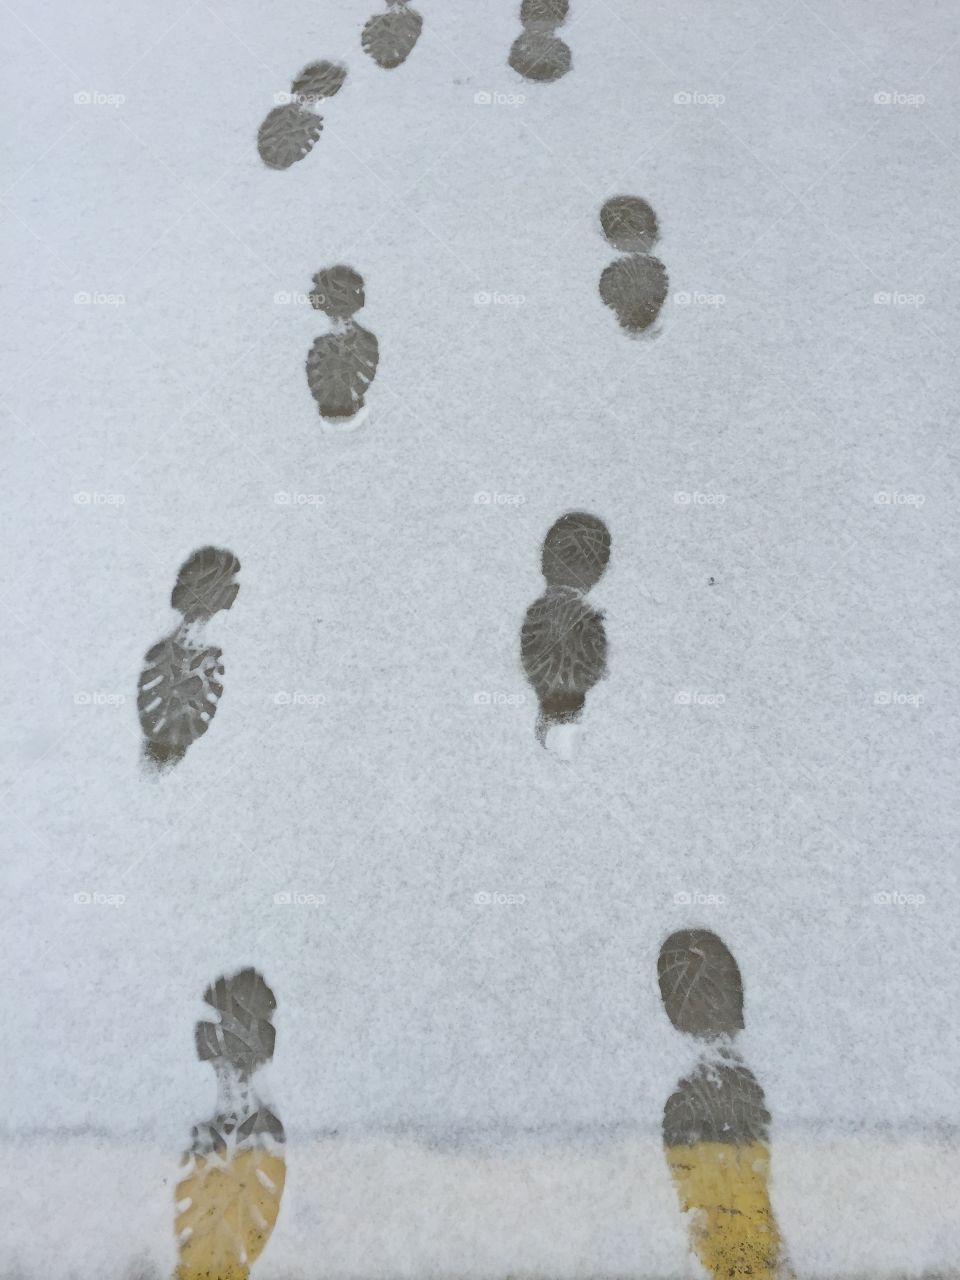 My dad and my footprints in the snow